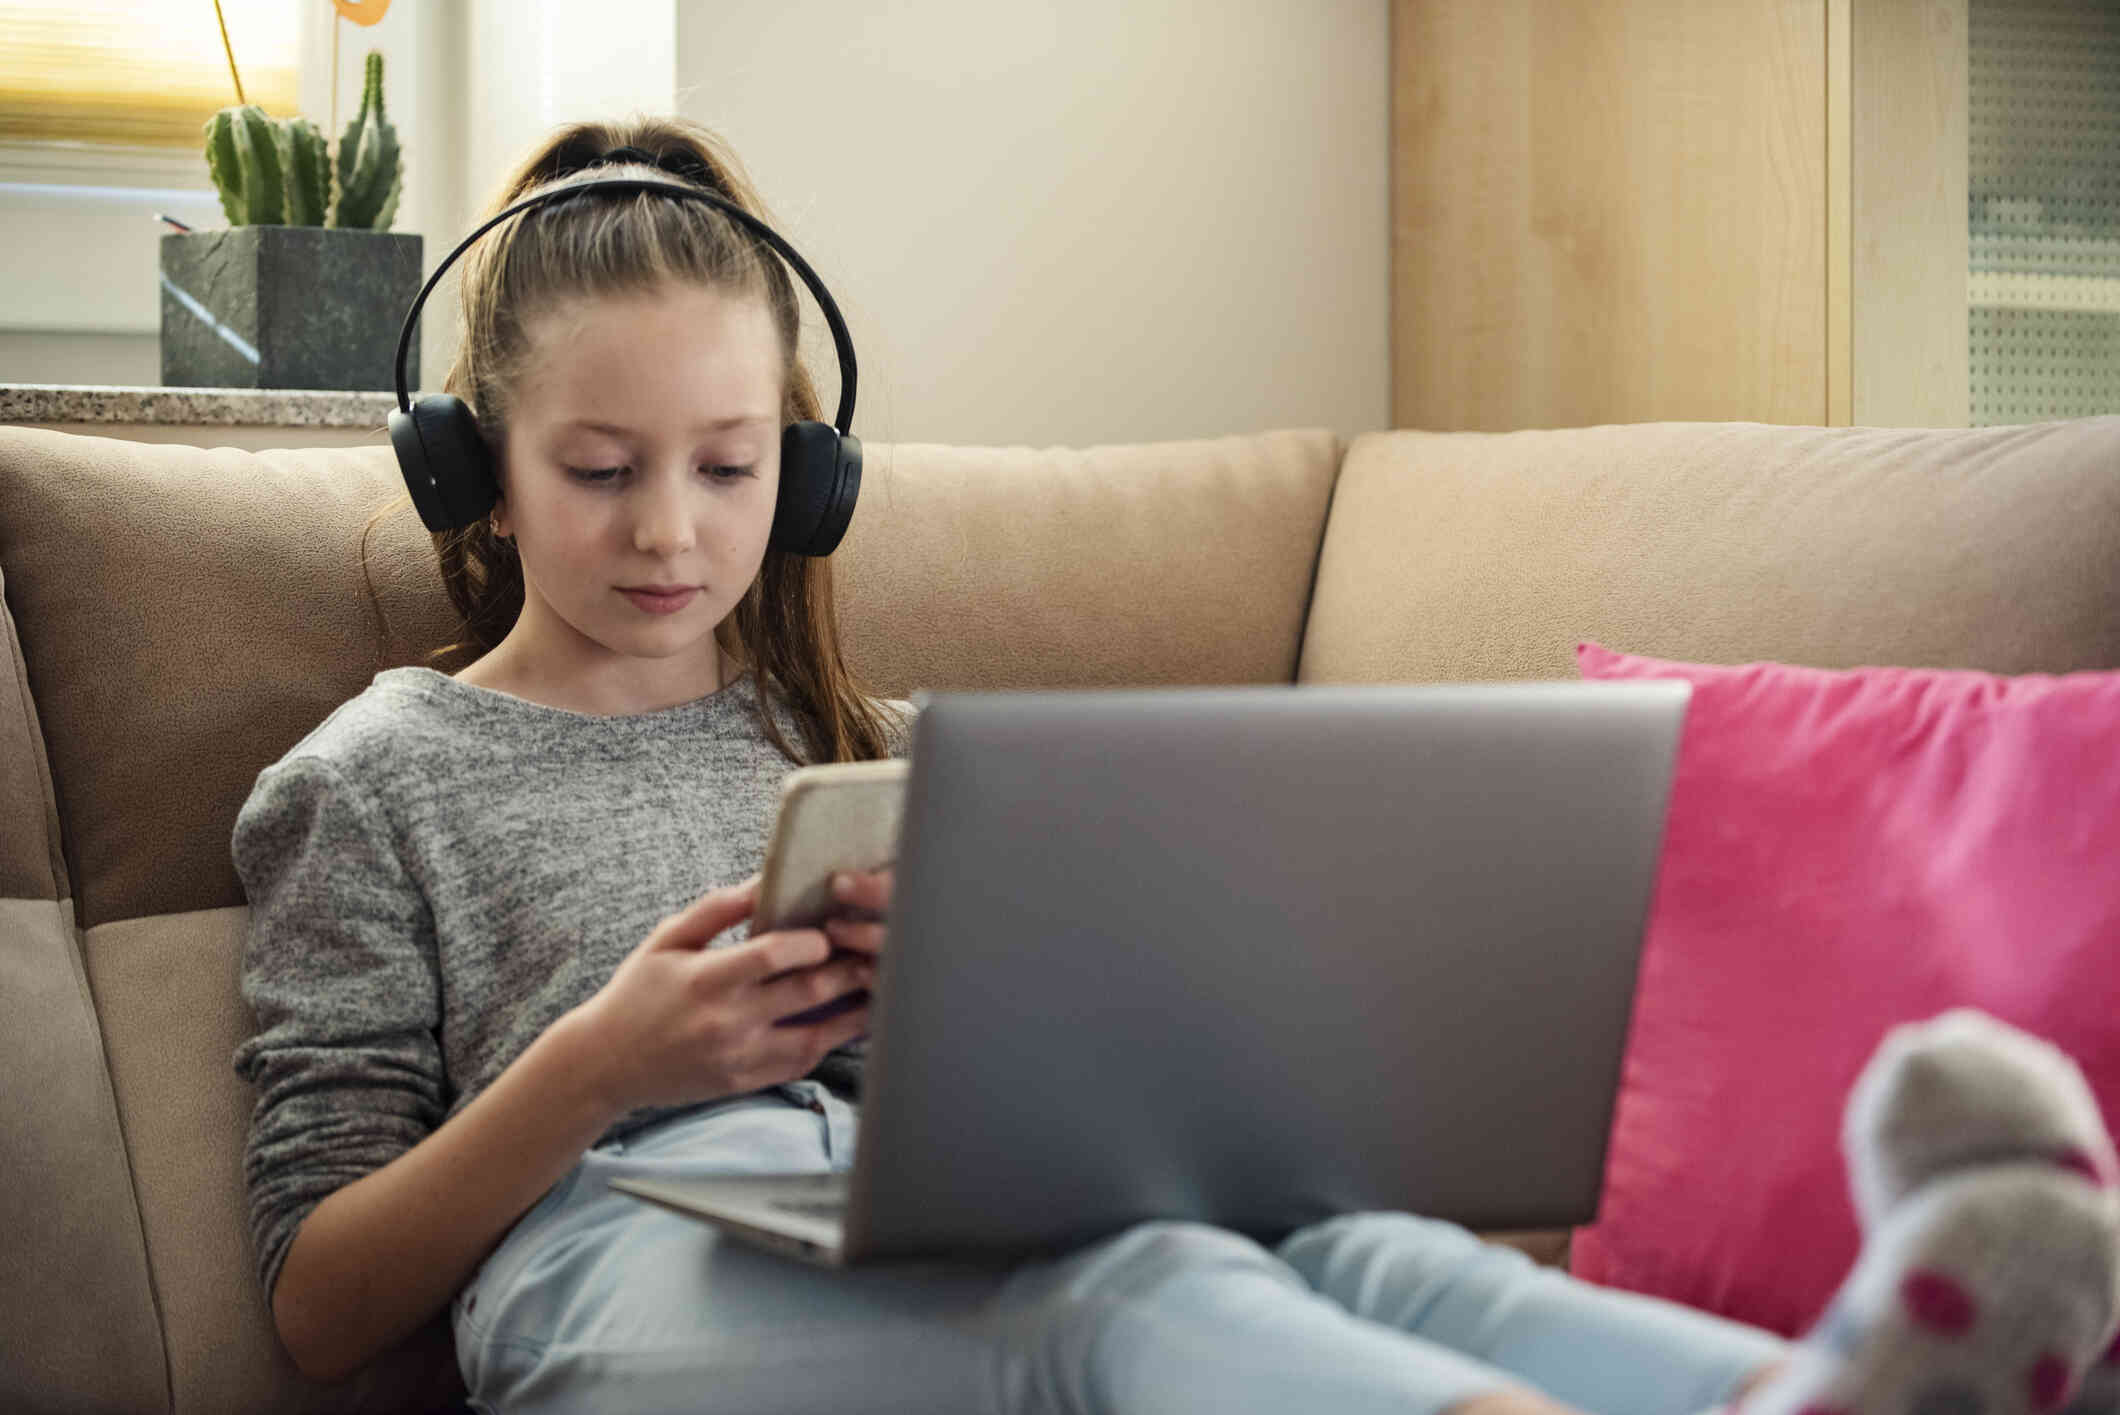 A teen girl reclines on the couch with with black headphones and her laptop open in her lap while looking down at the cellphone in her hand with a serious expression.